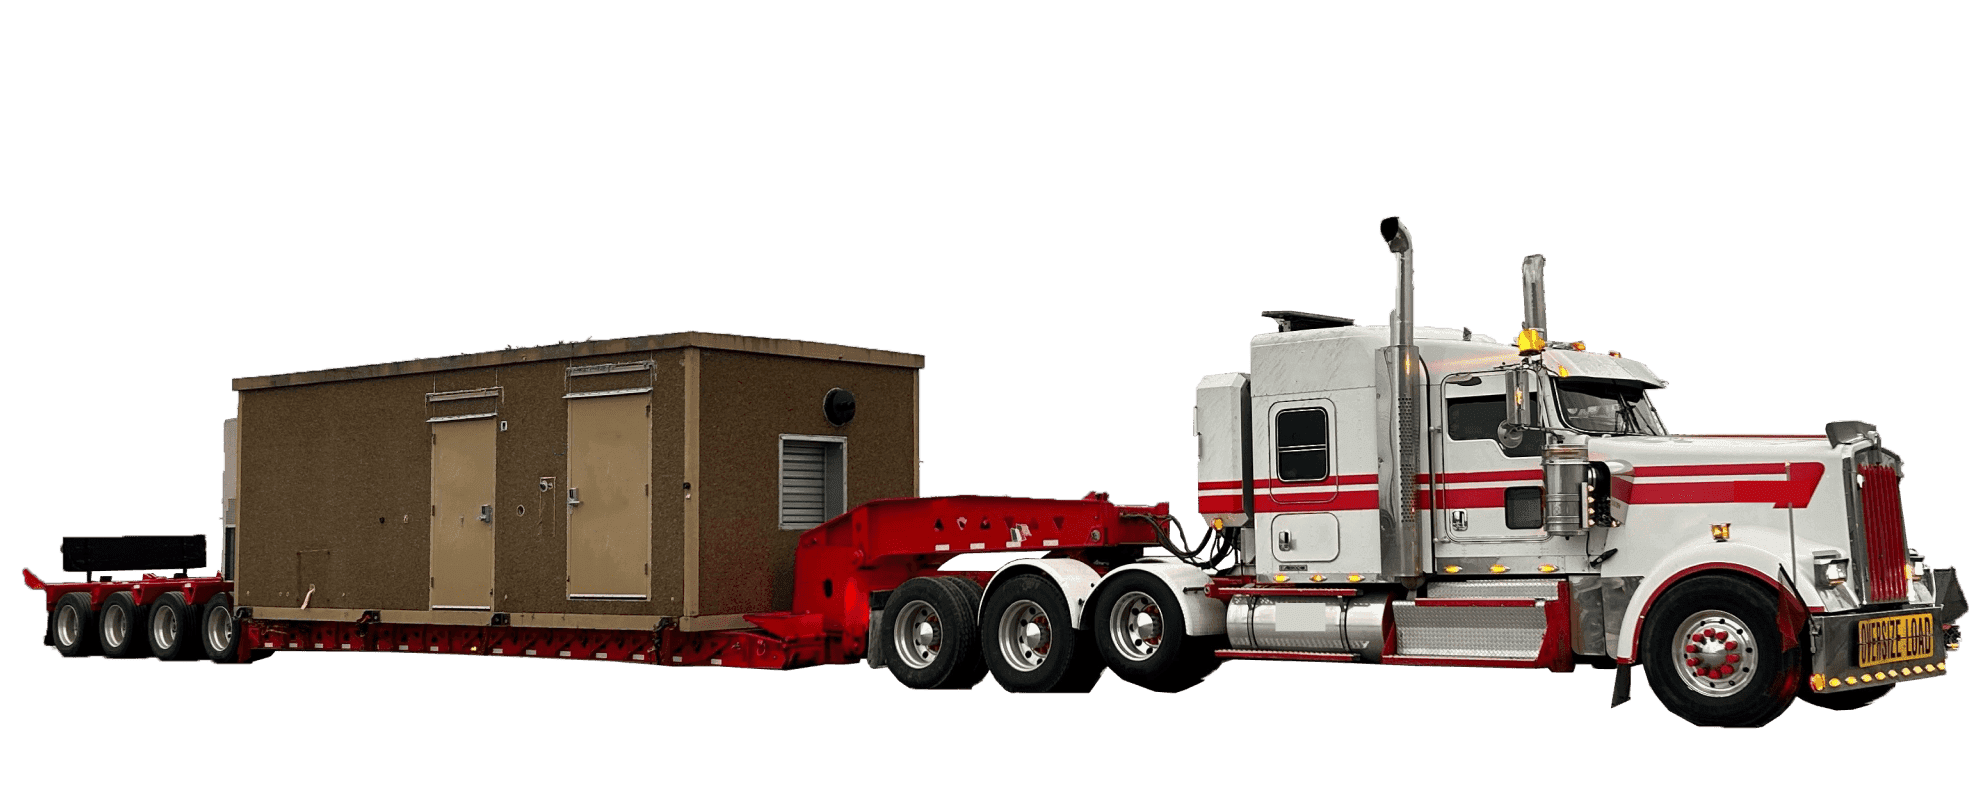 An overdimensional freight truck carrying a portable room on a low flatbed.